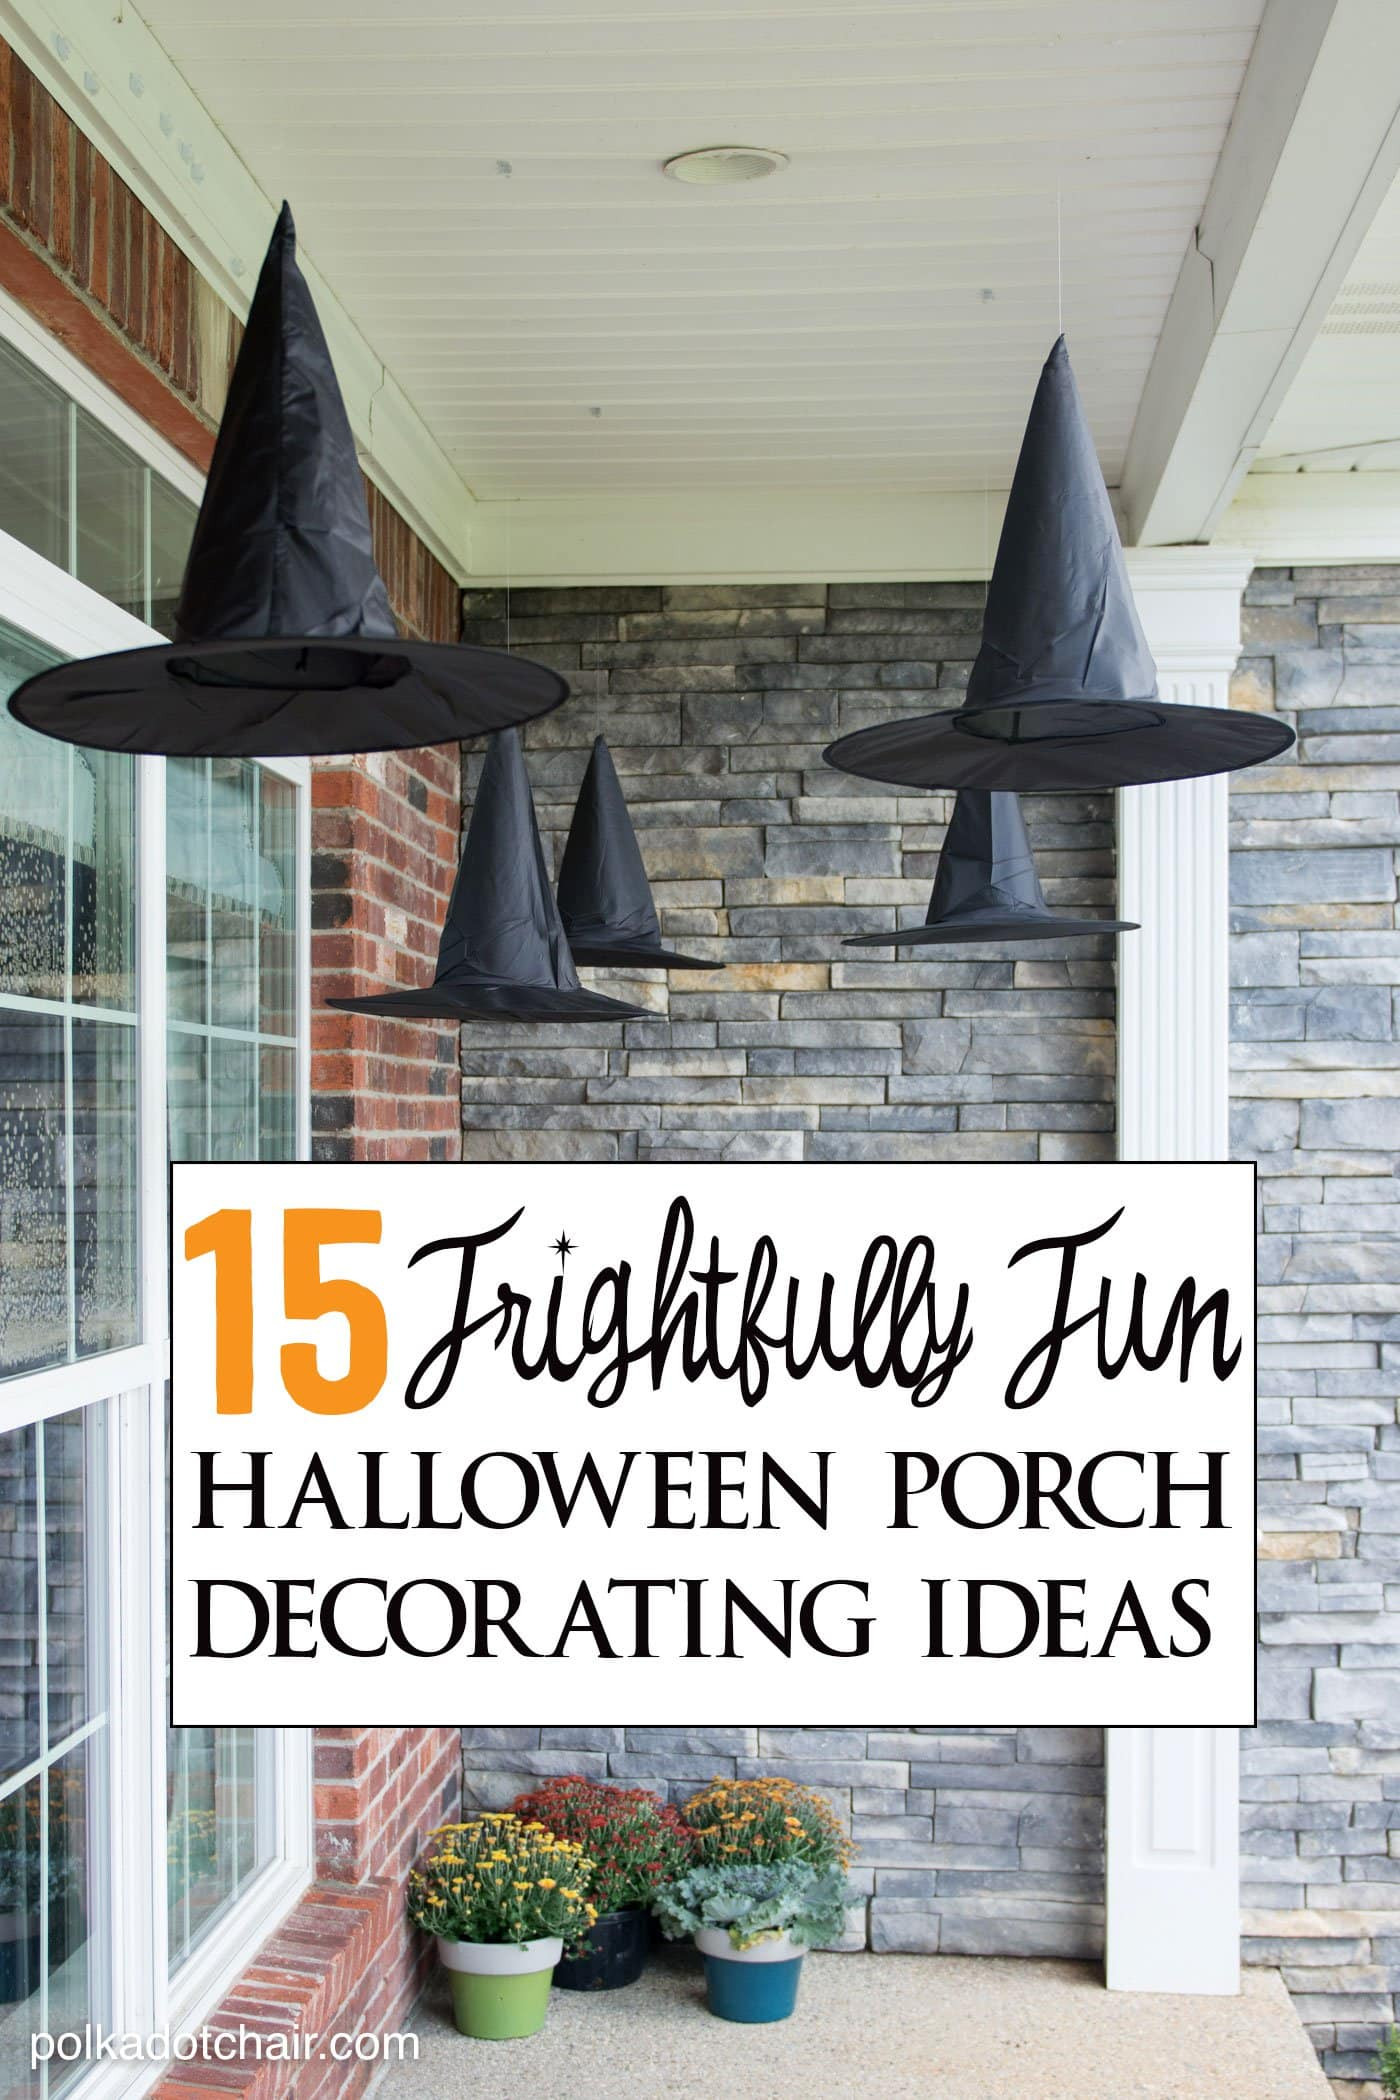 Halloween Porch Decor
 15 Frightfully Cute Ways to Decorate a Porch for Halloween